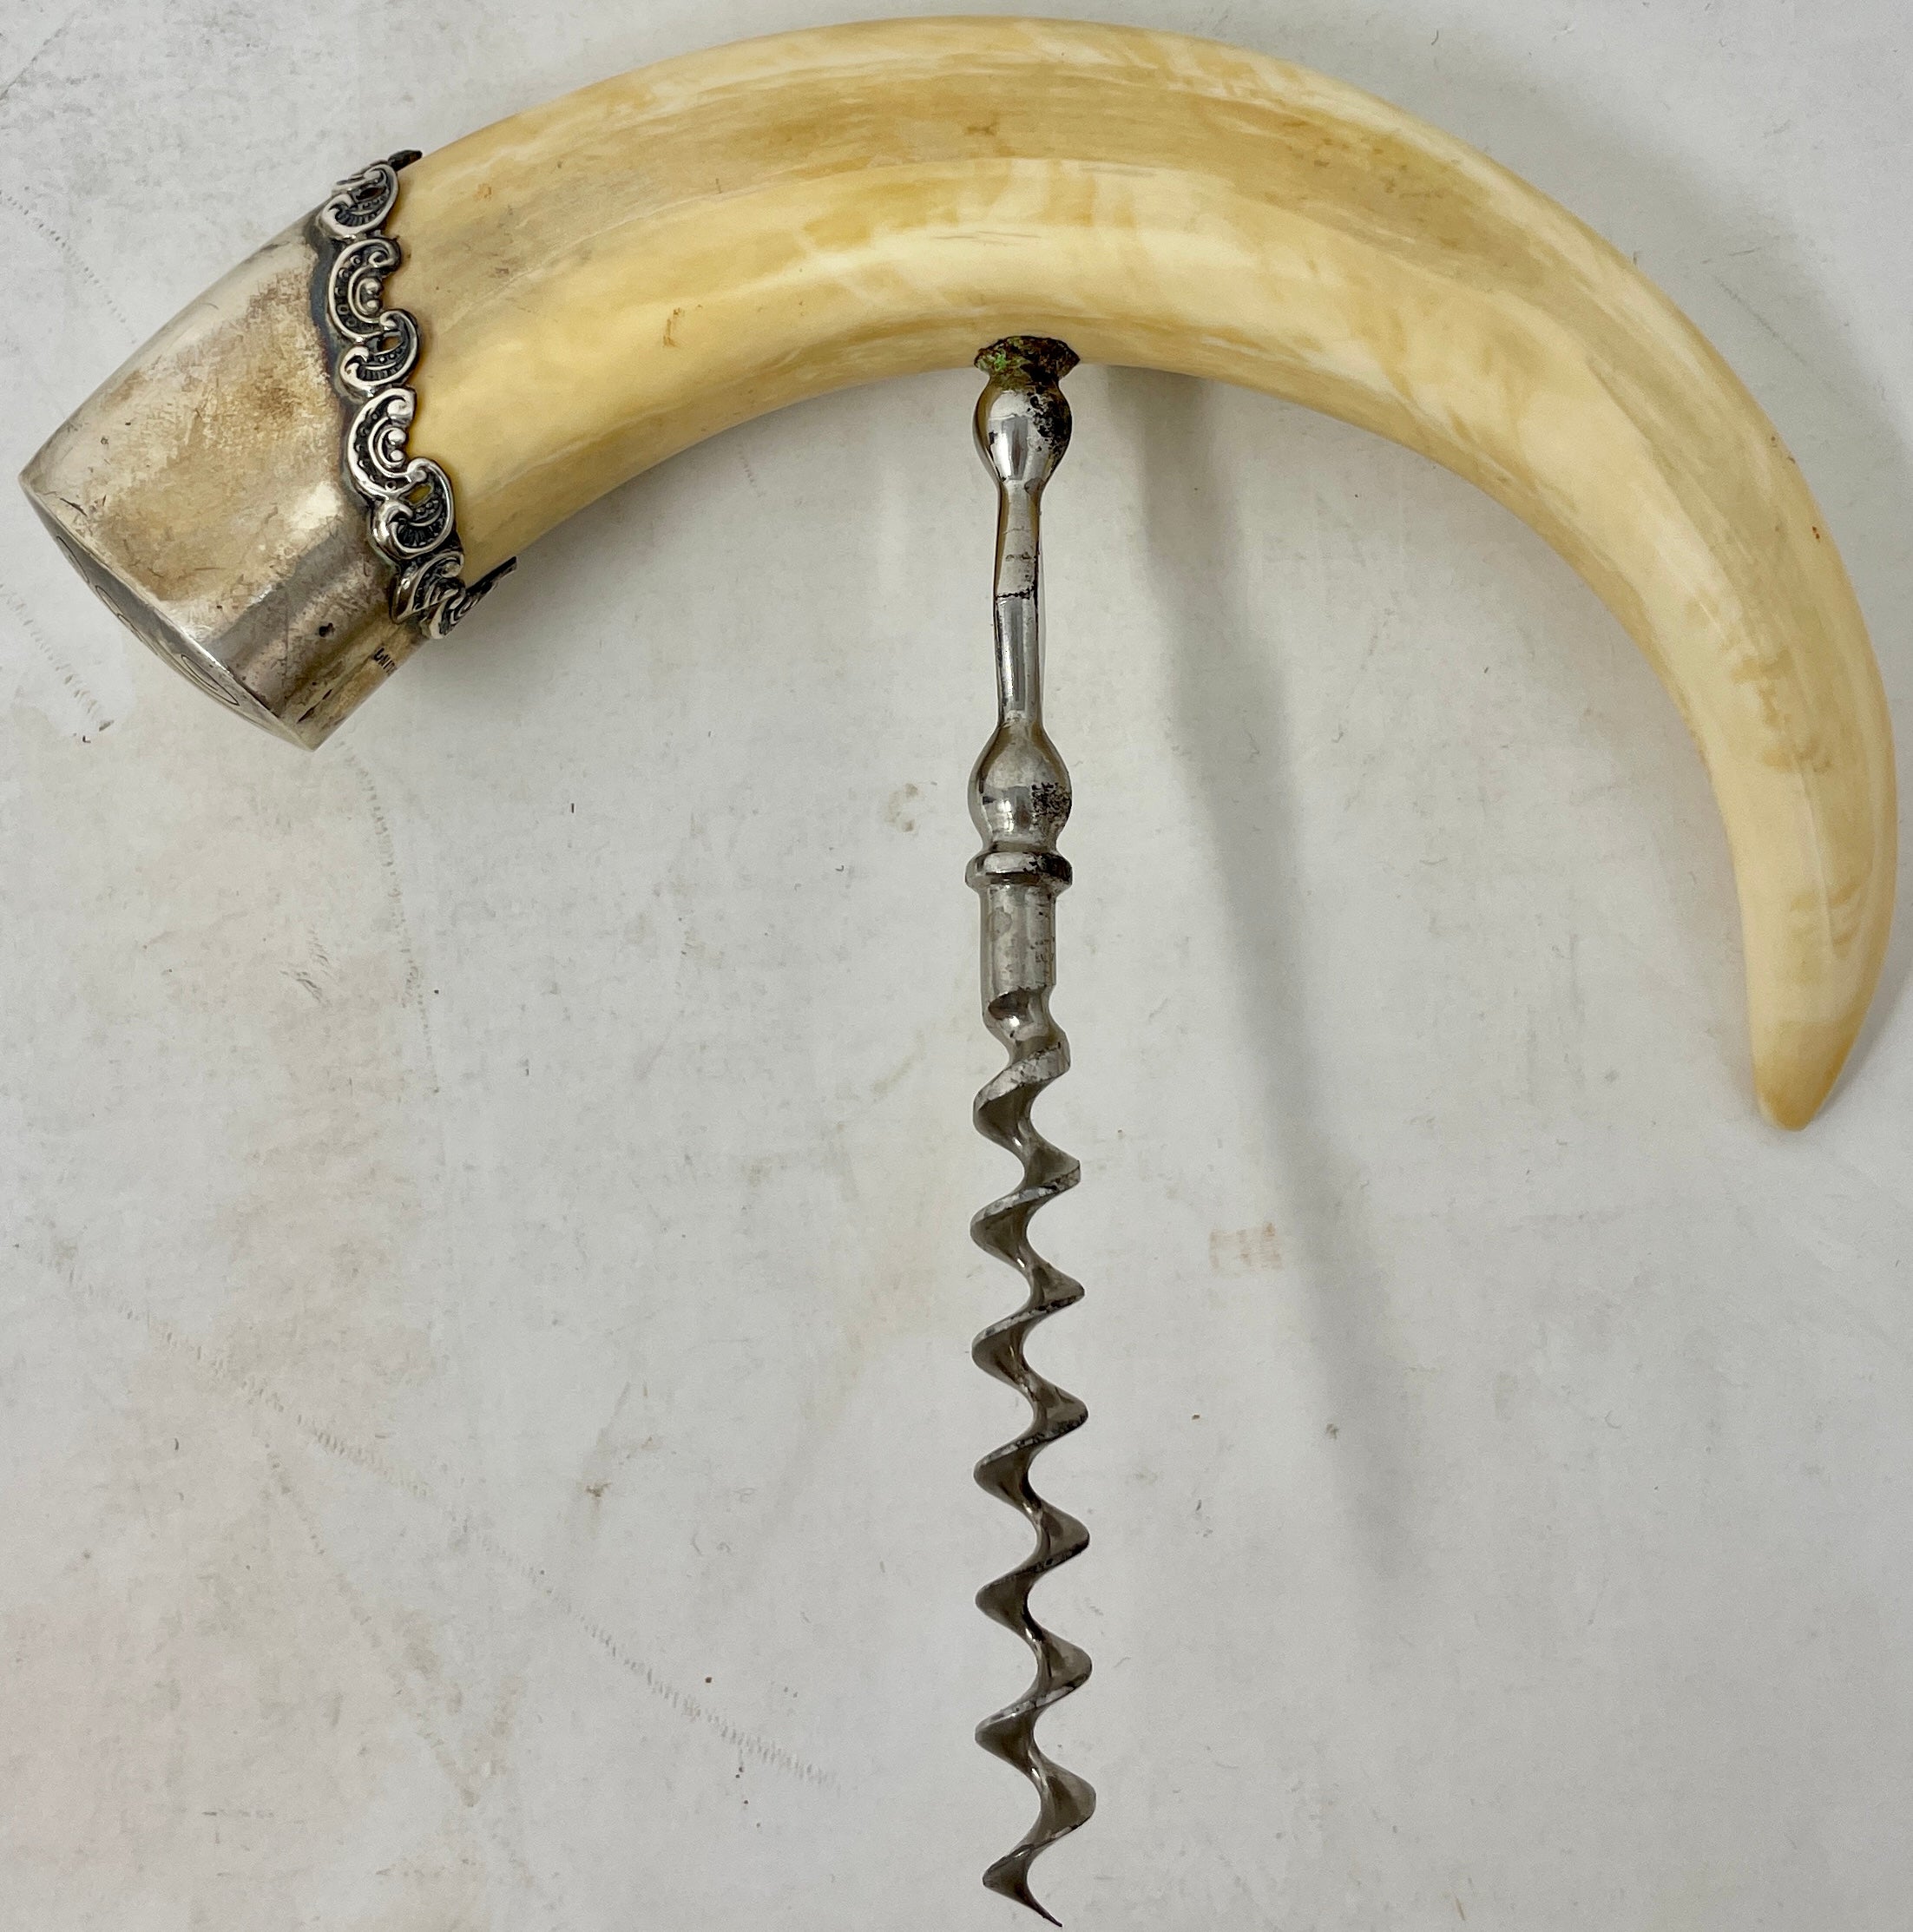 Antique Boar's Tusk Corkscrew with Sterling Silver Mounts and Nickel Silver Worm, Circa 1900.